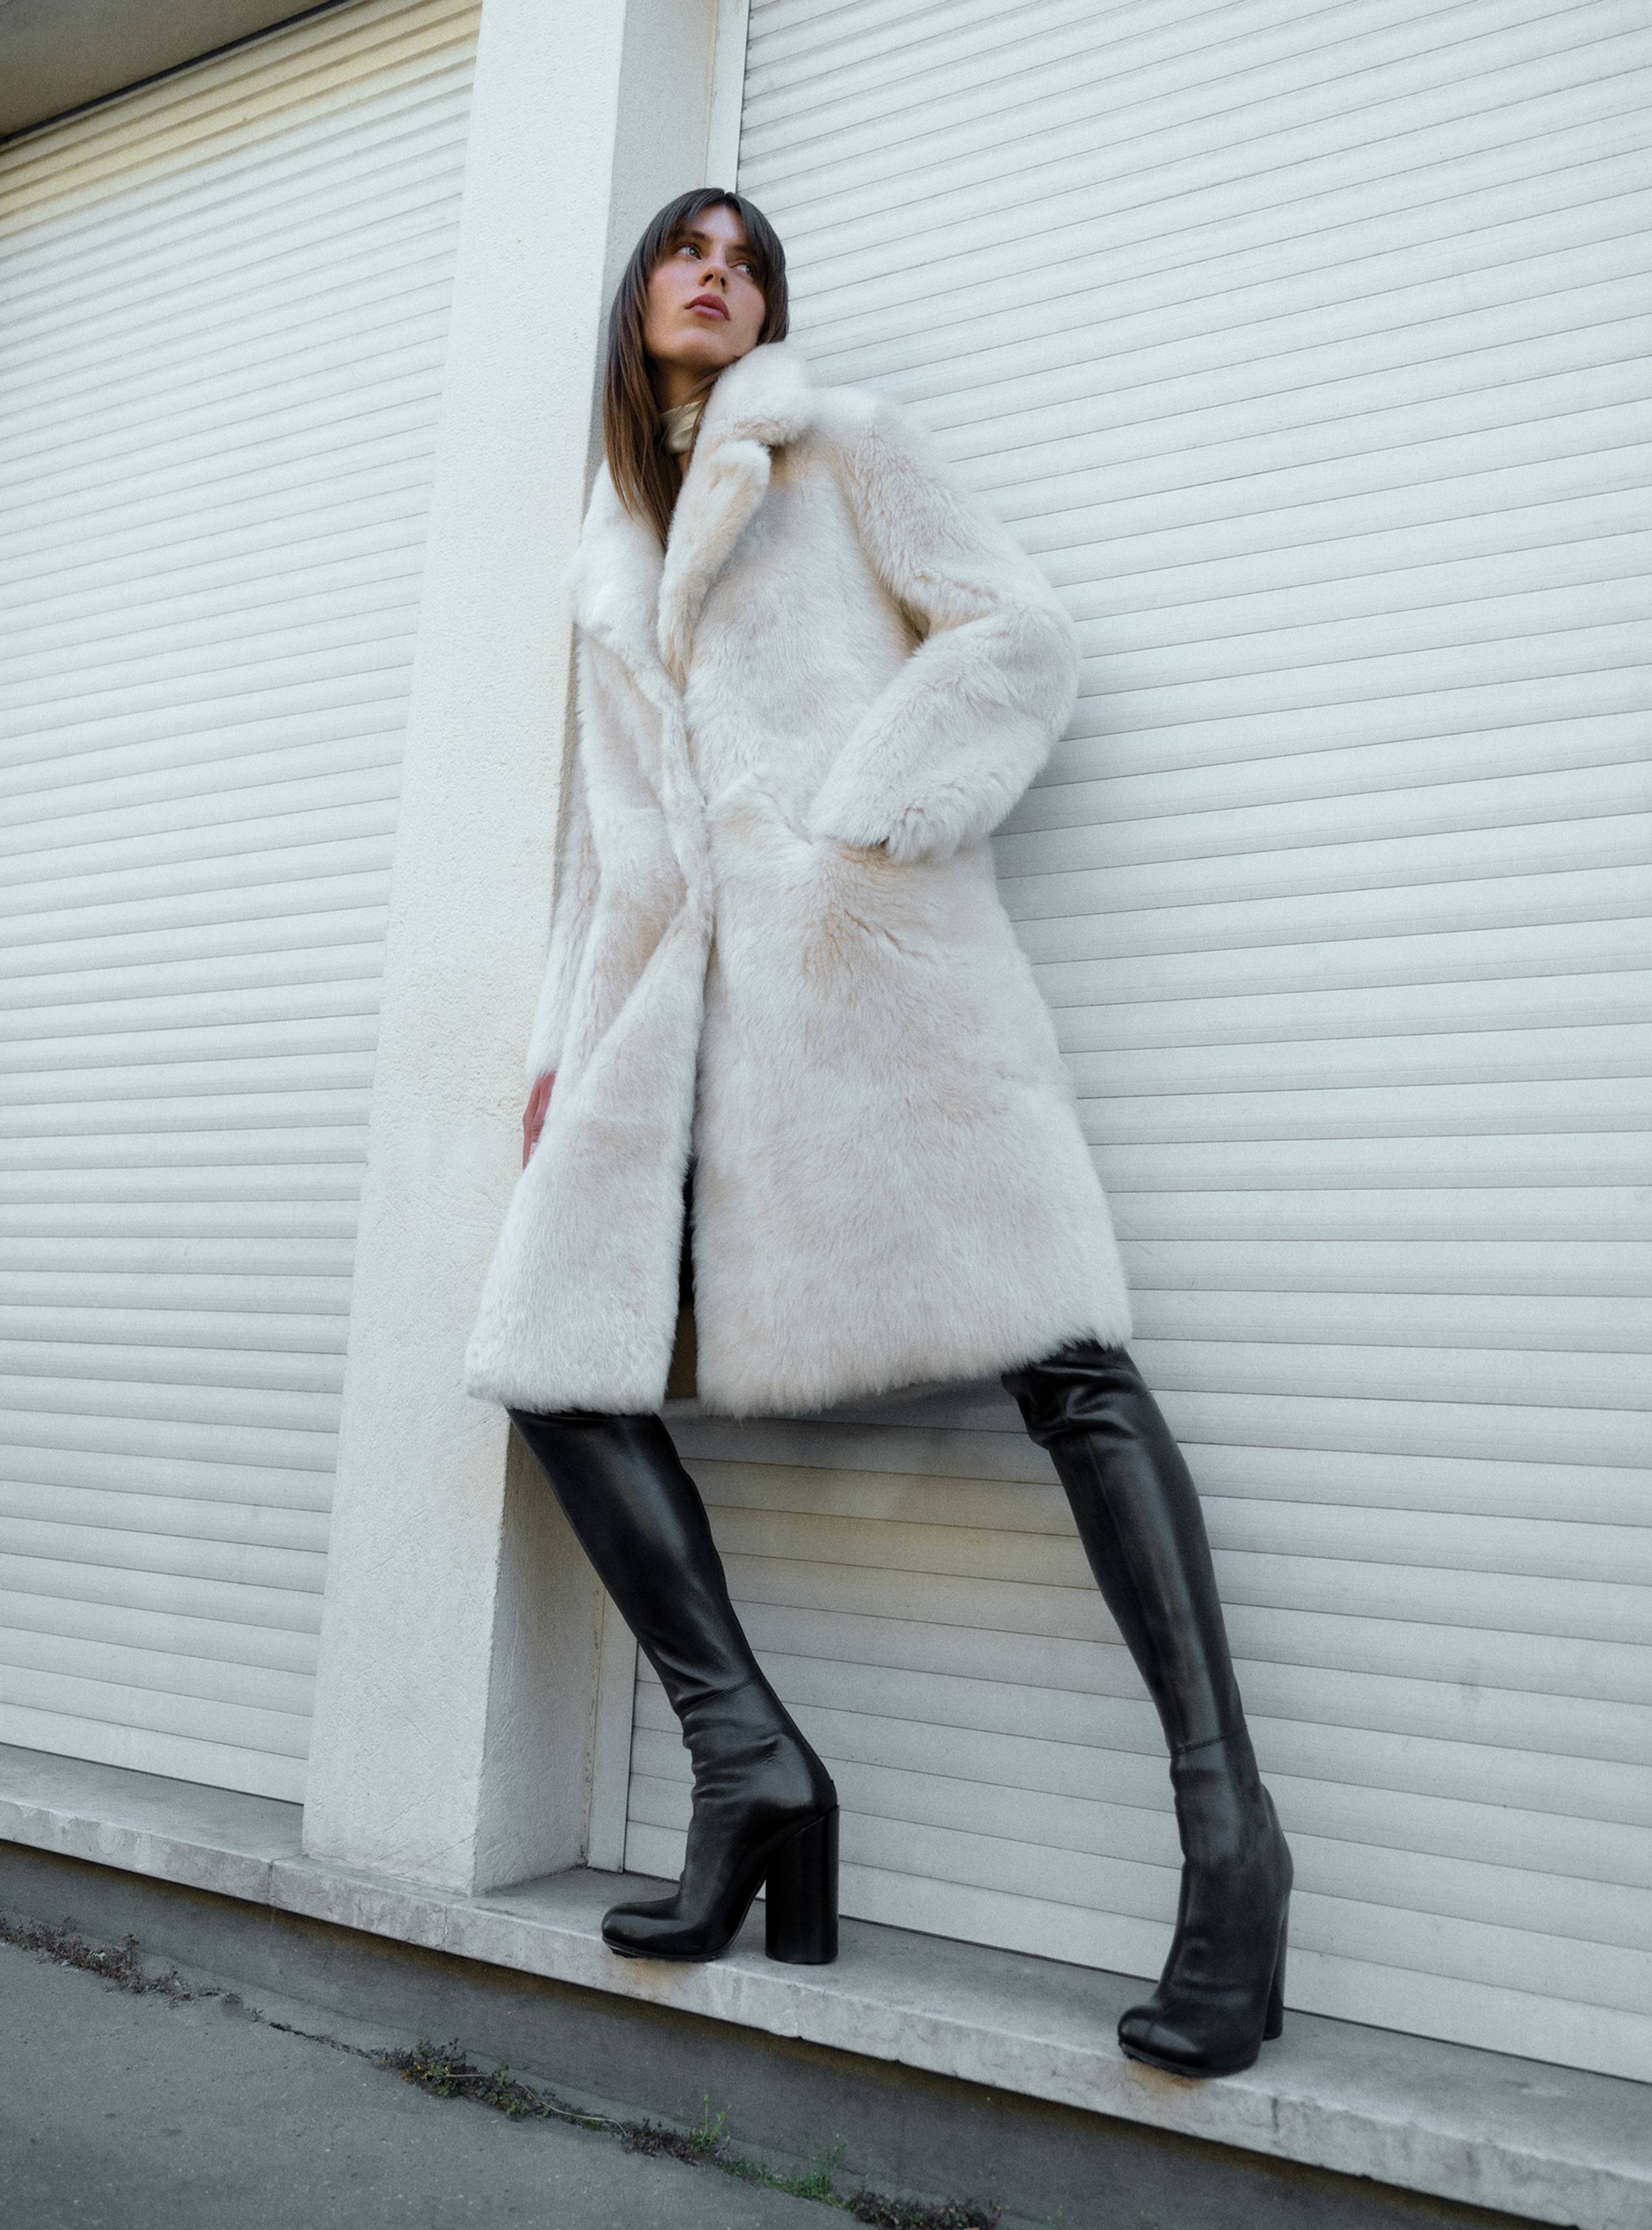 A model leaning against a white wall in the Evita Ivory Apres Ski Shearling Choat